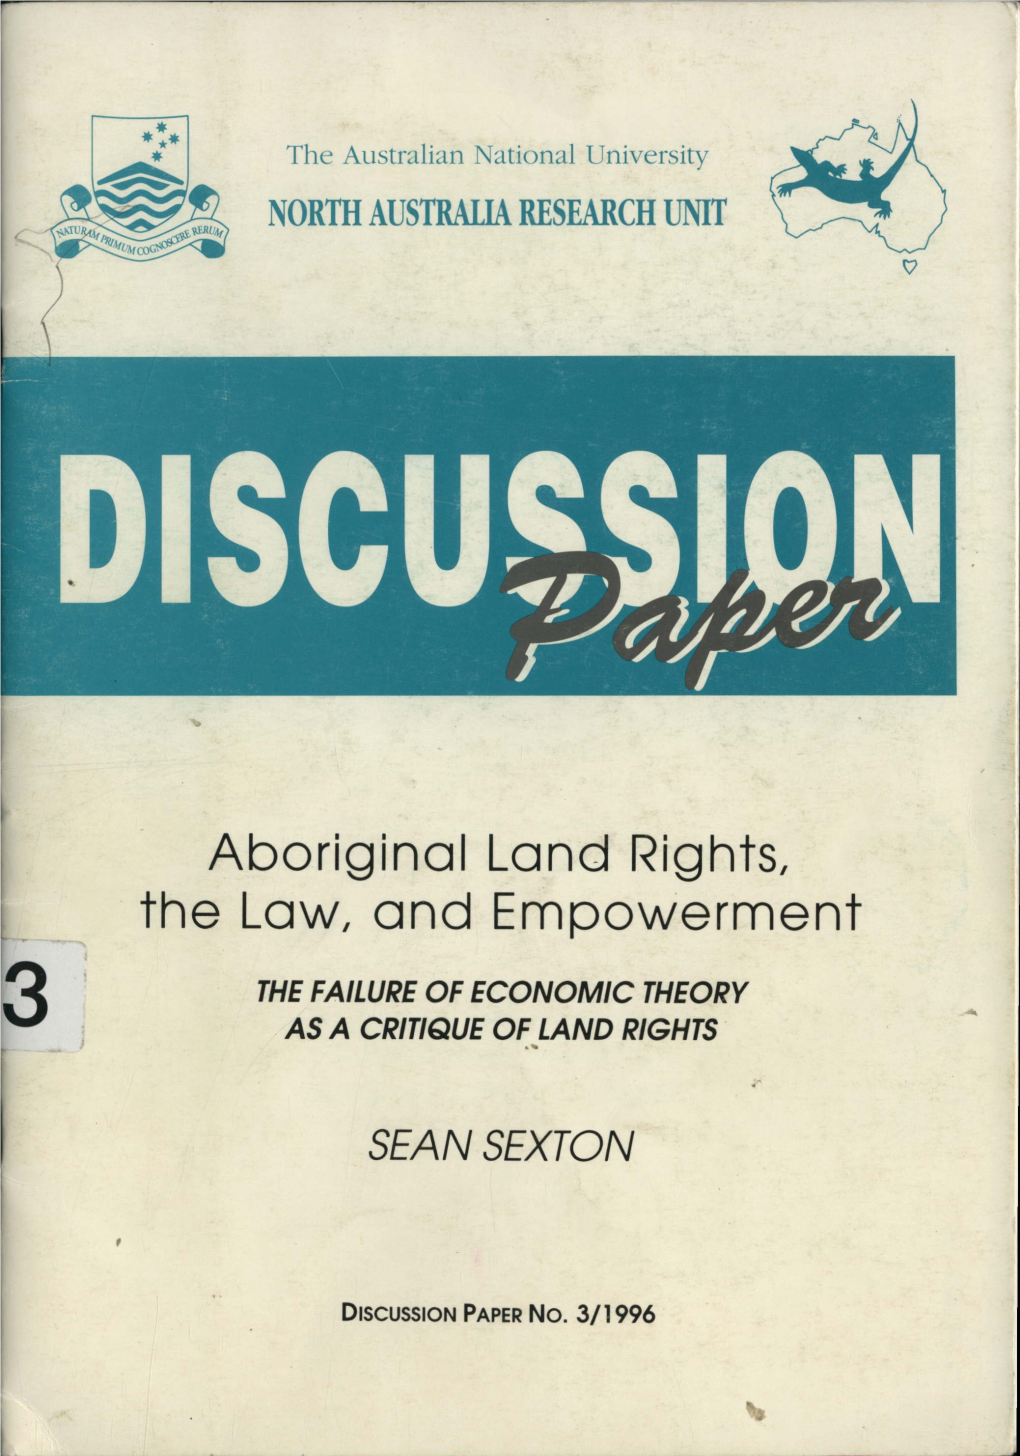 Aboriginal Land Rights, the Law, and Empowerment